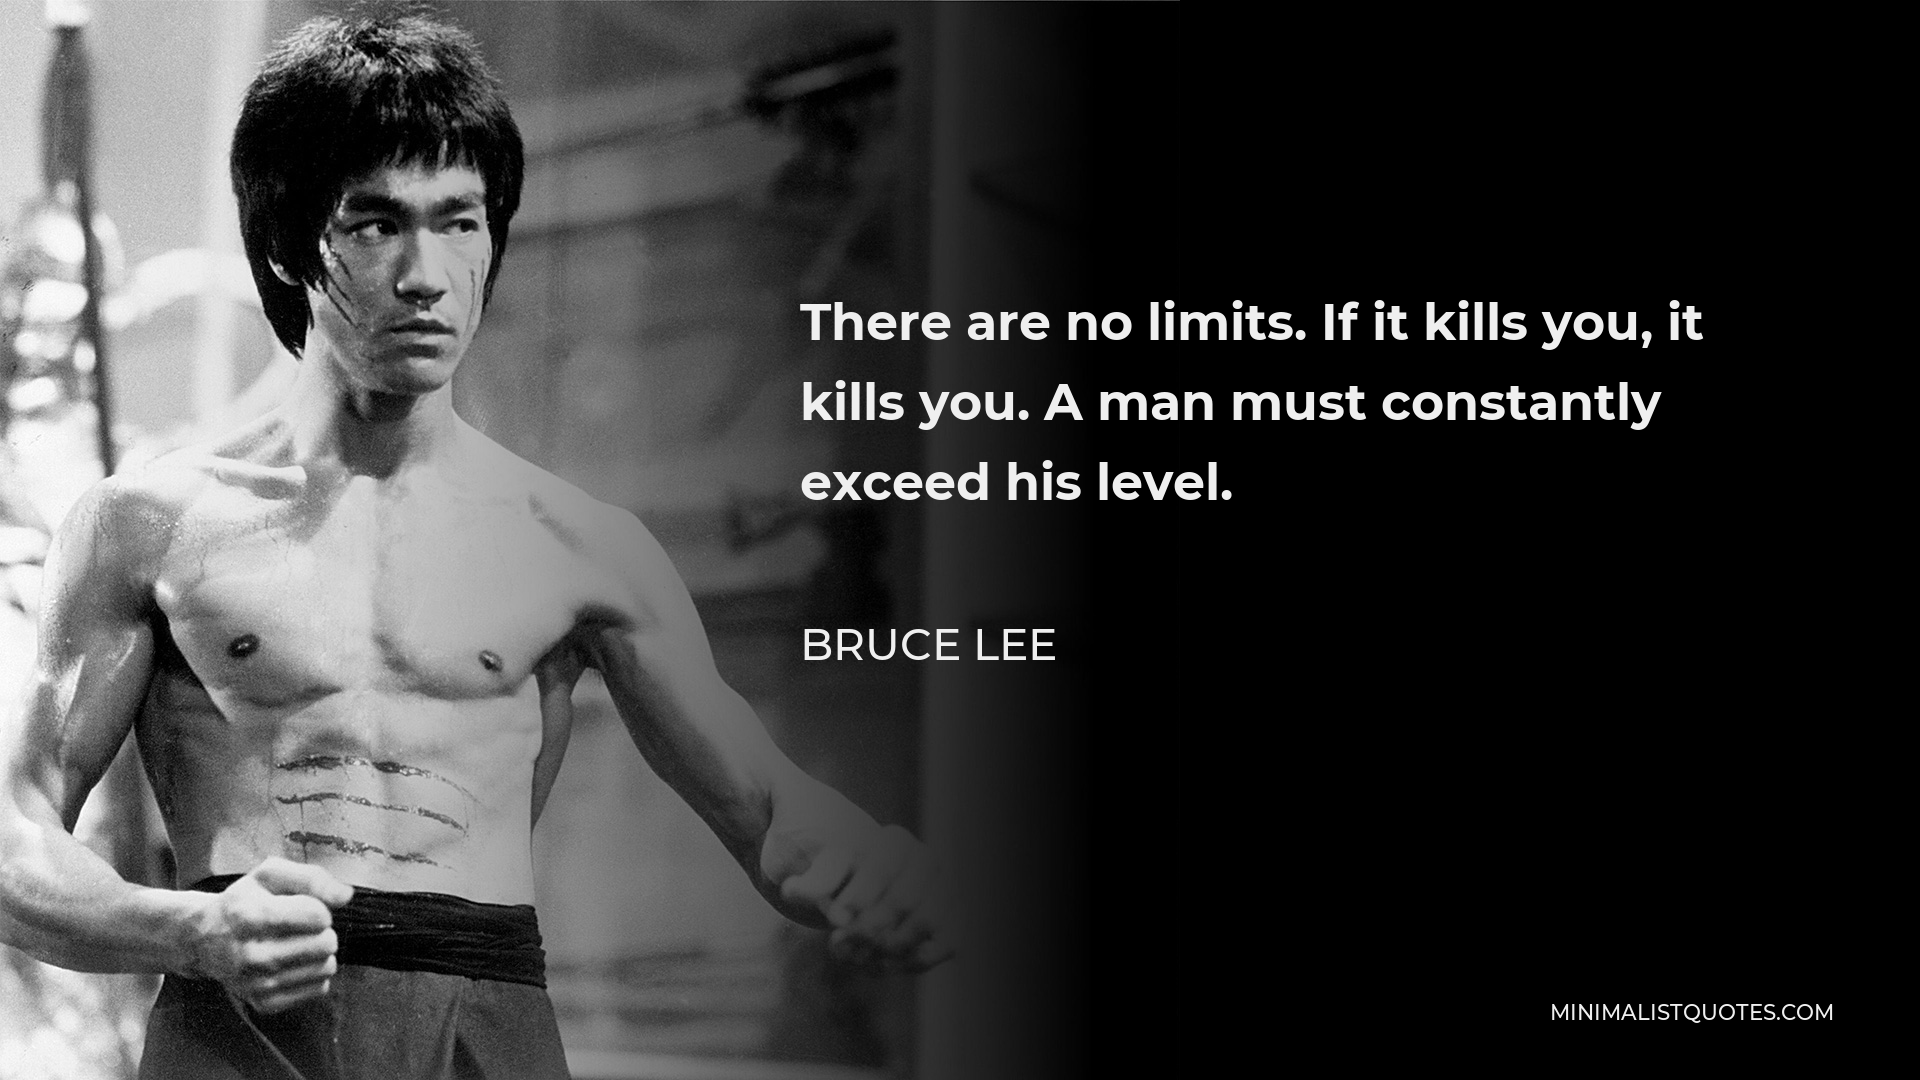 Bruce Lee Quote - There are no limits. If it kills you, it kills you. A man must constantly exceed his level.